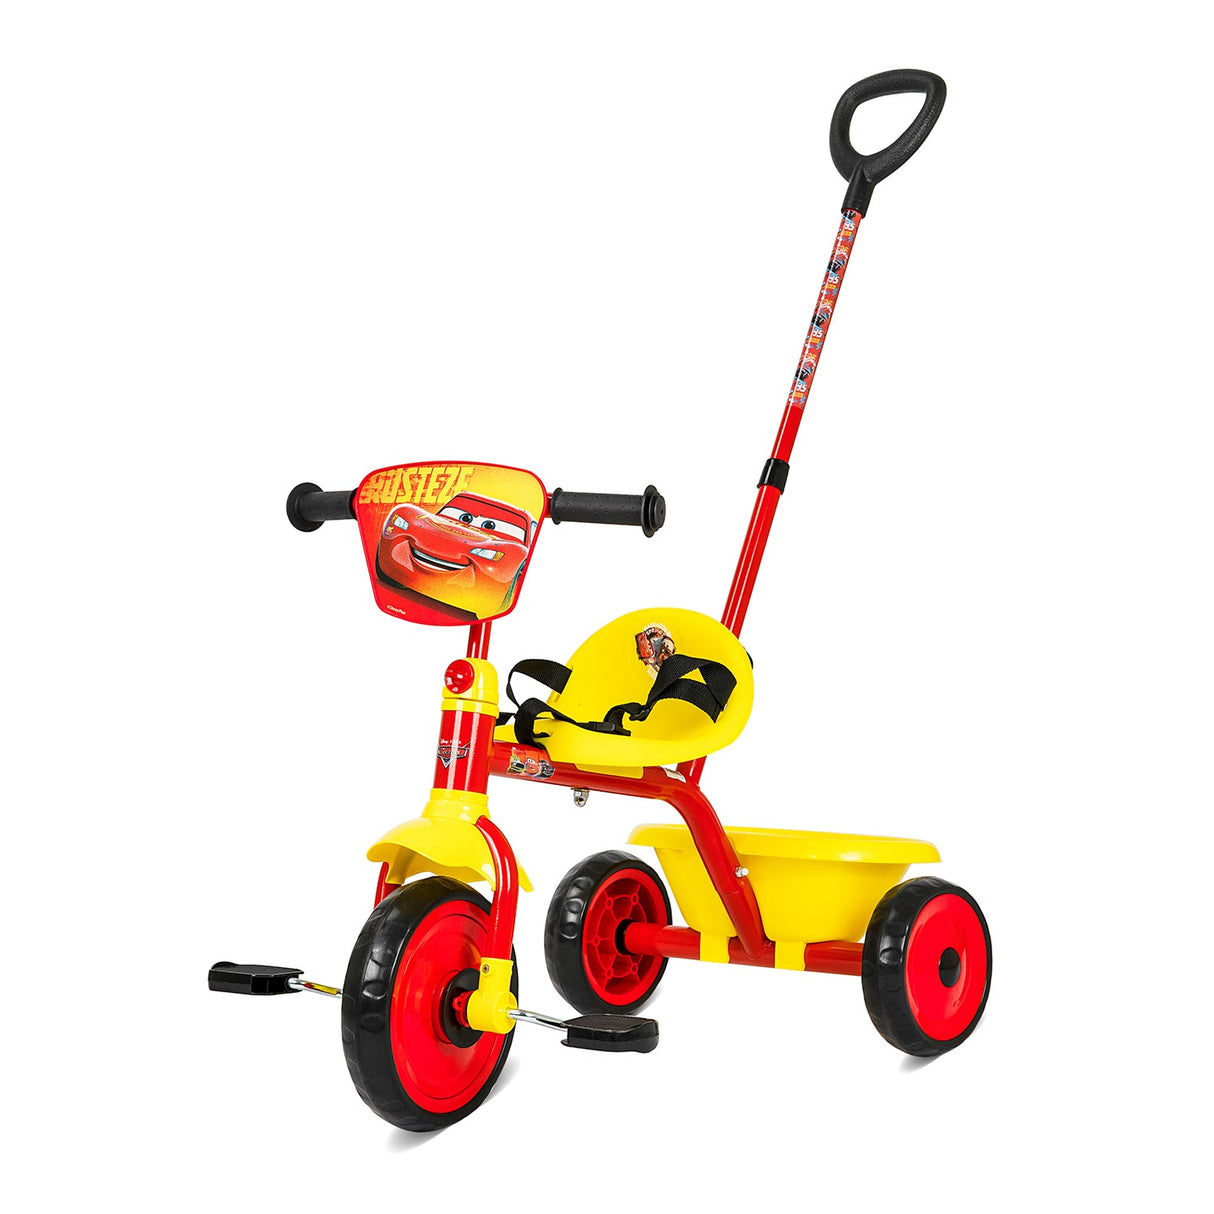 Spartan Disney Cars Children's Tricycle with Pushbar